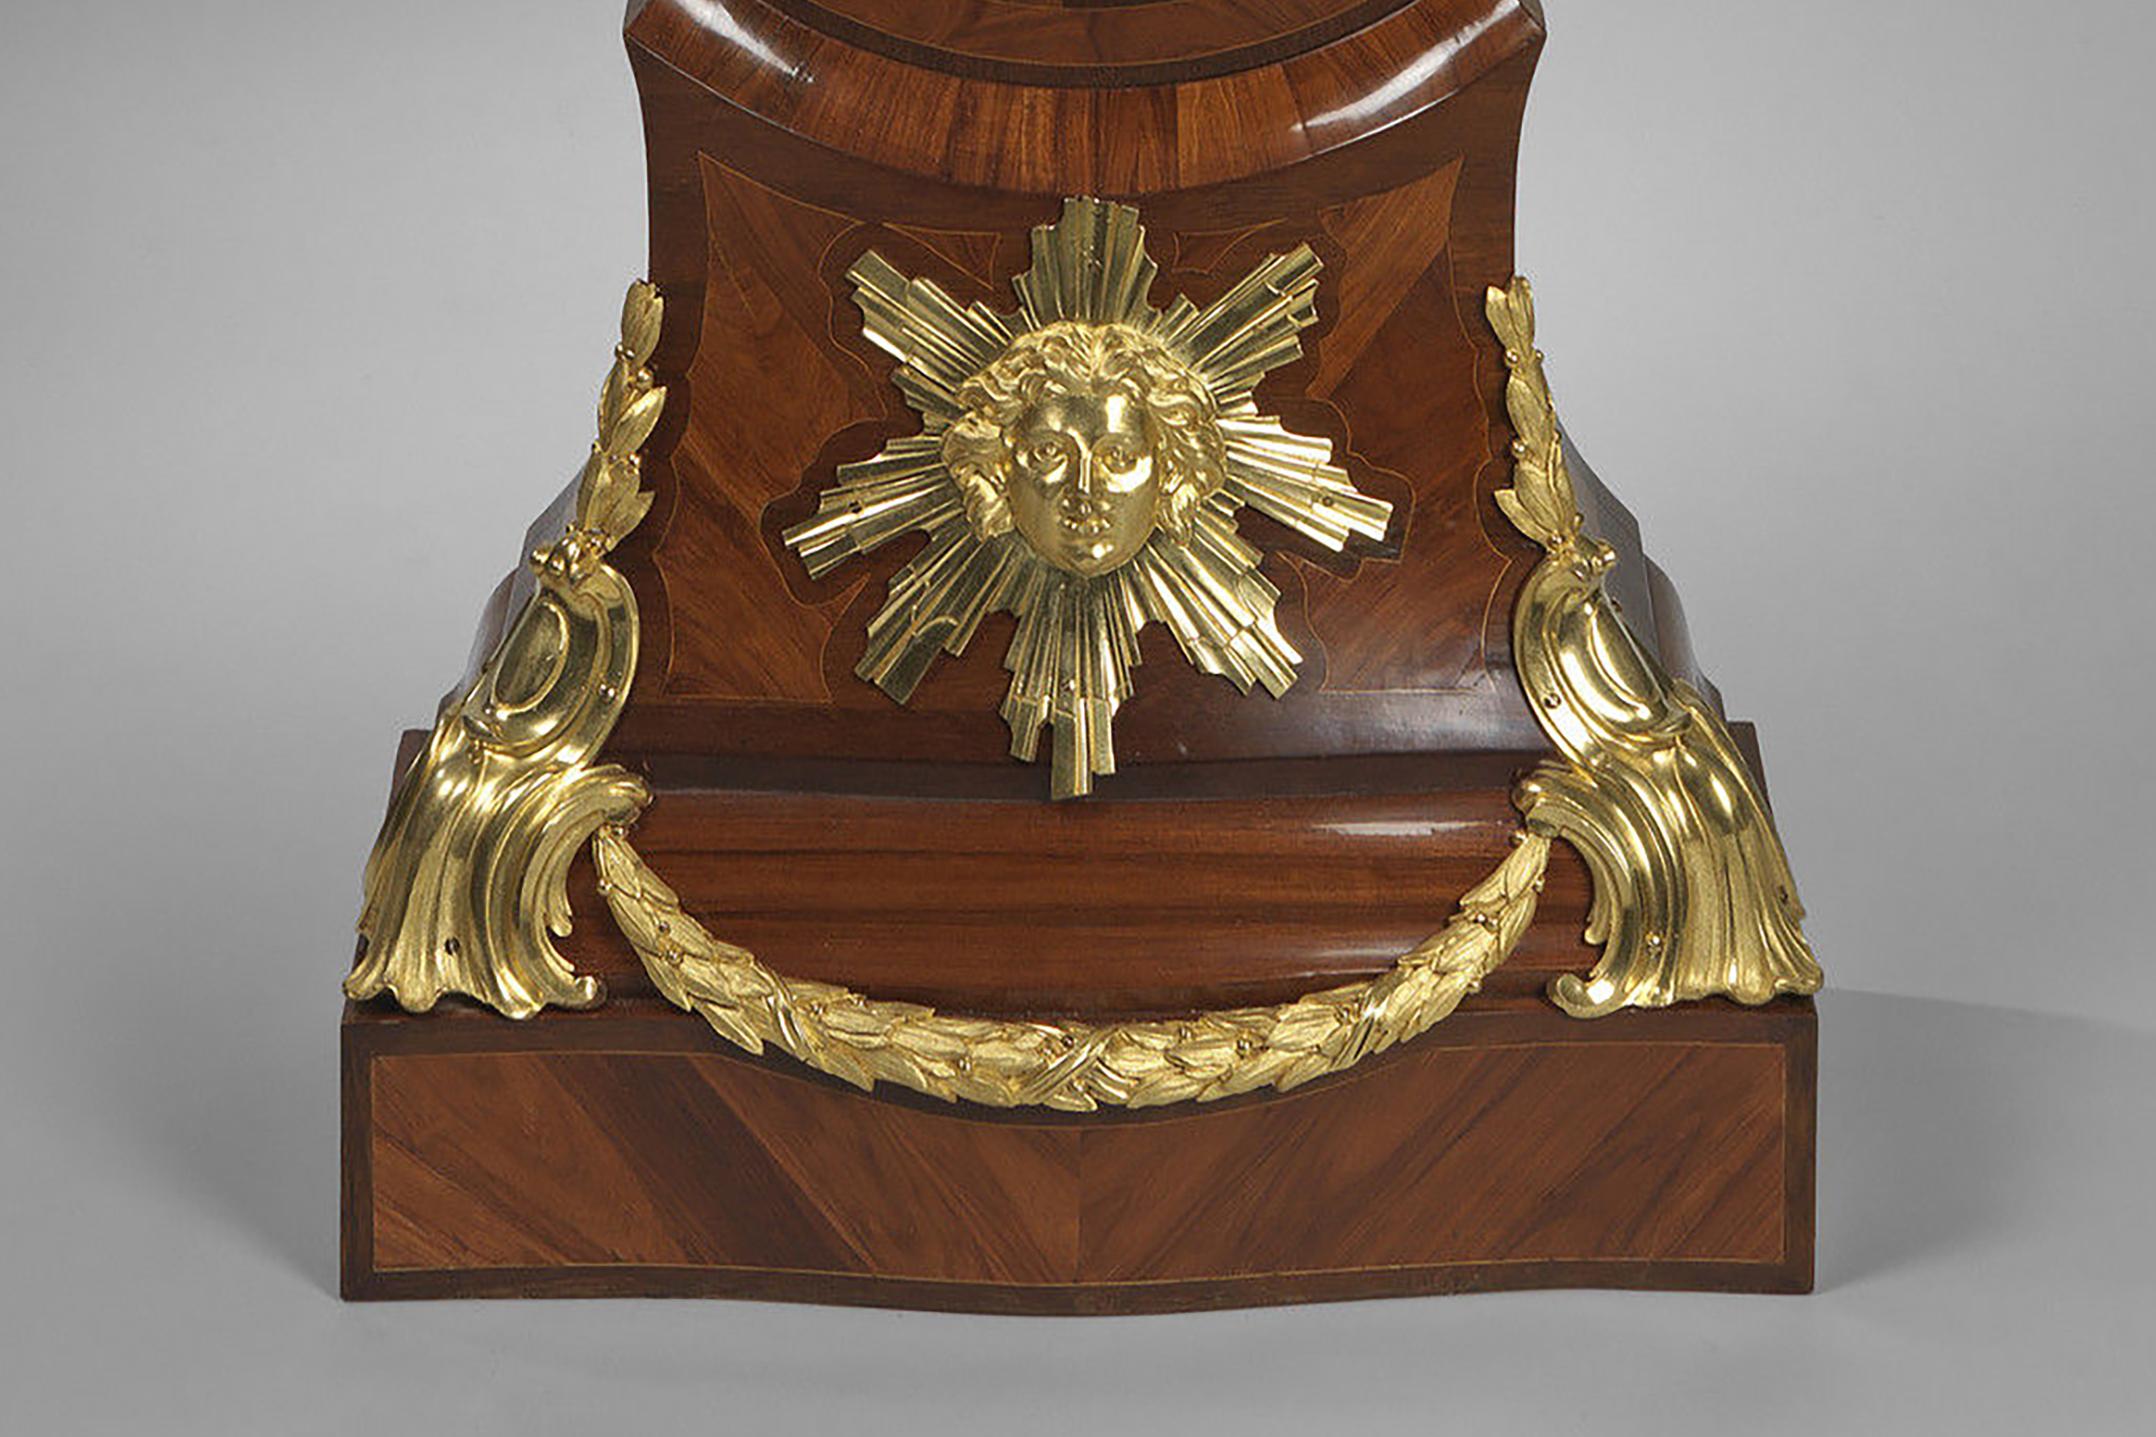 Marquetry Late Louis XV Ormolu-Mounted Regulator, Movement by Lapaute, Case by Petit For Sale